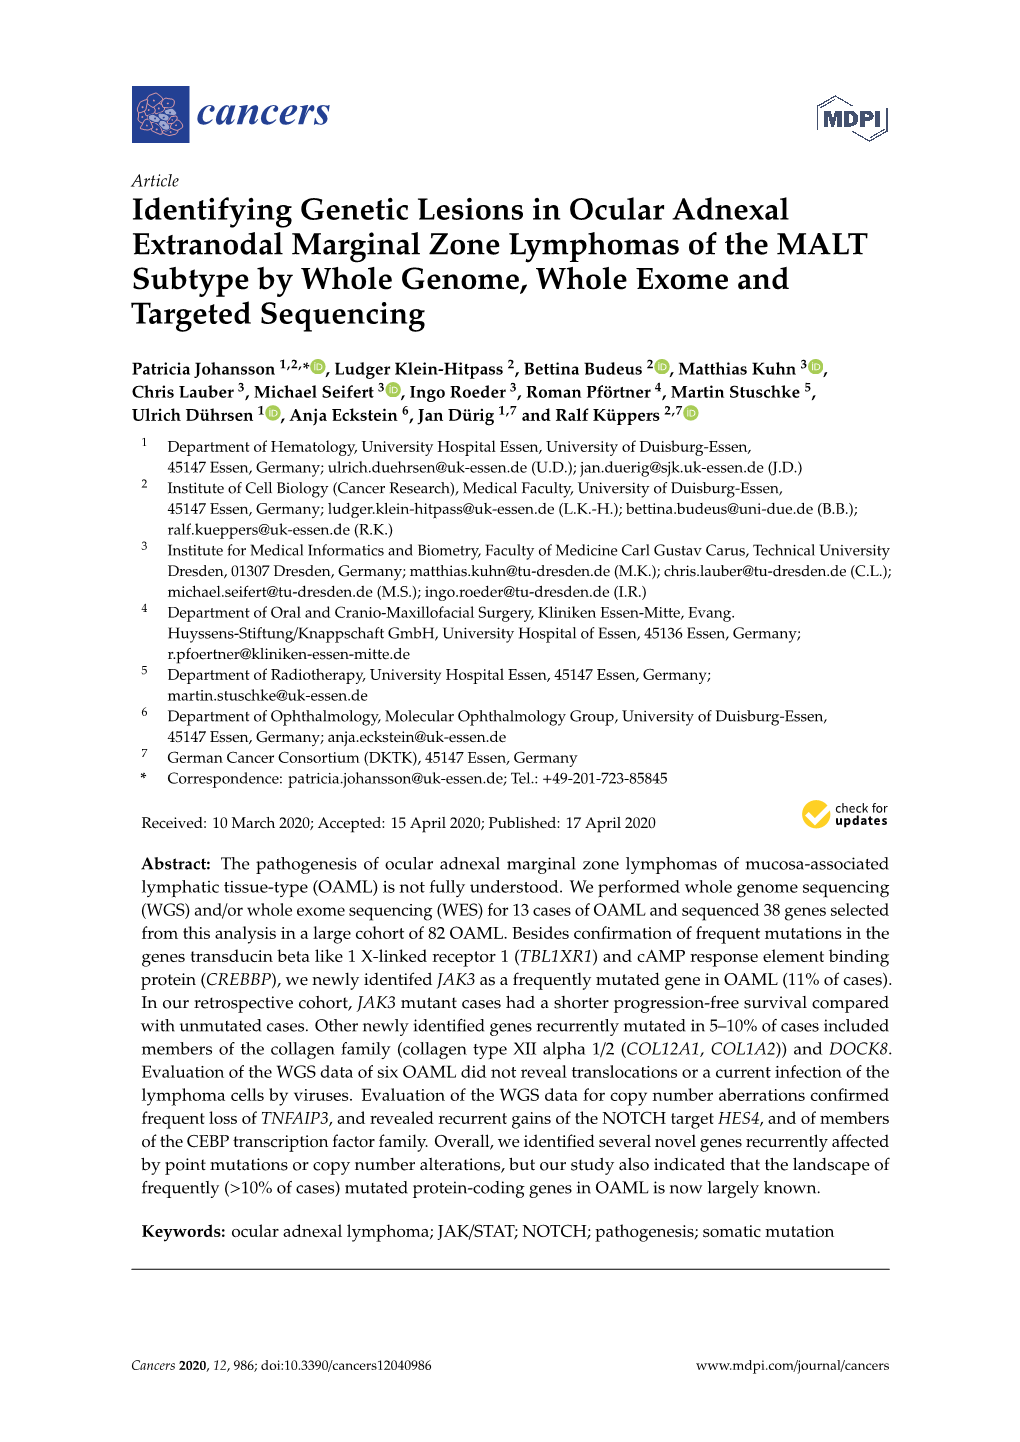 Identifying Genetic Lesions in Ocular Adnexal Extranodal Marginal Zone Lymphomas of the MALT Subtype by Whole Genome, Whole Exome and Targeted Sequencing